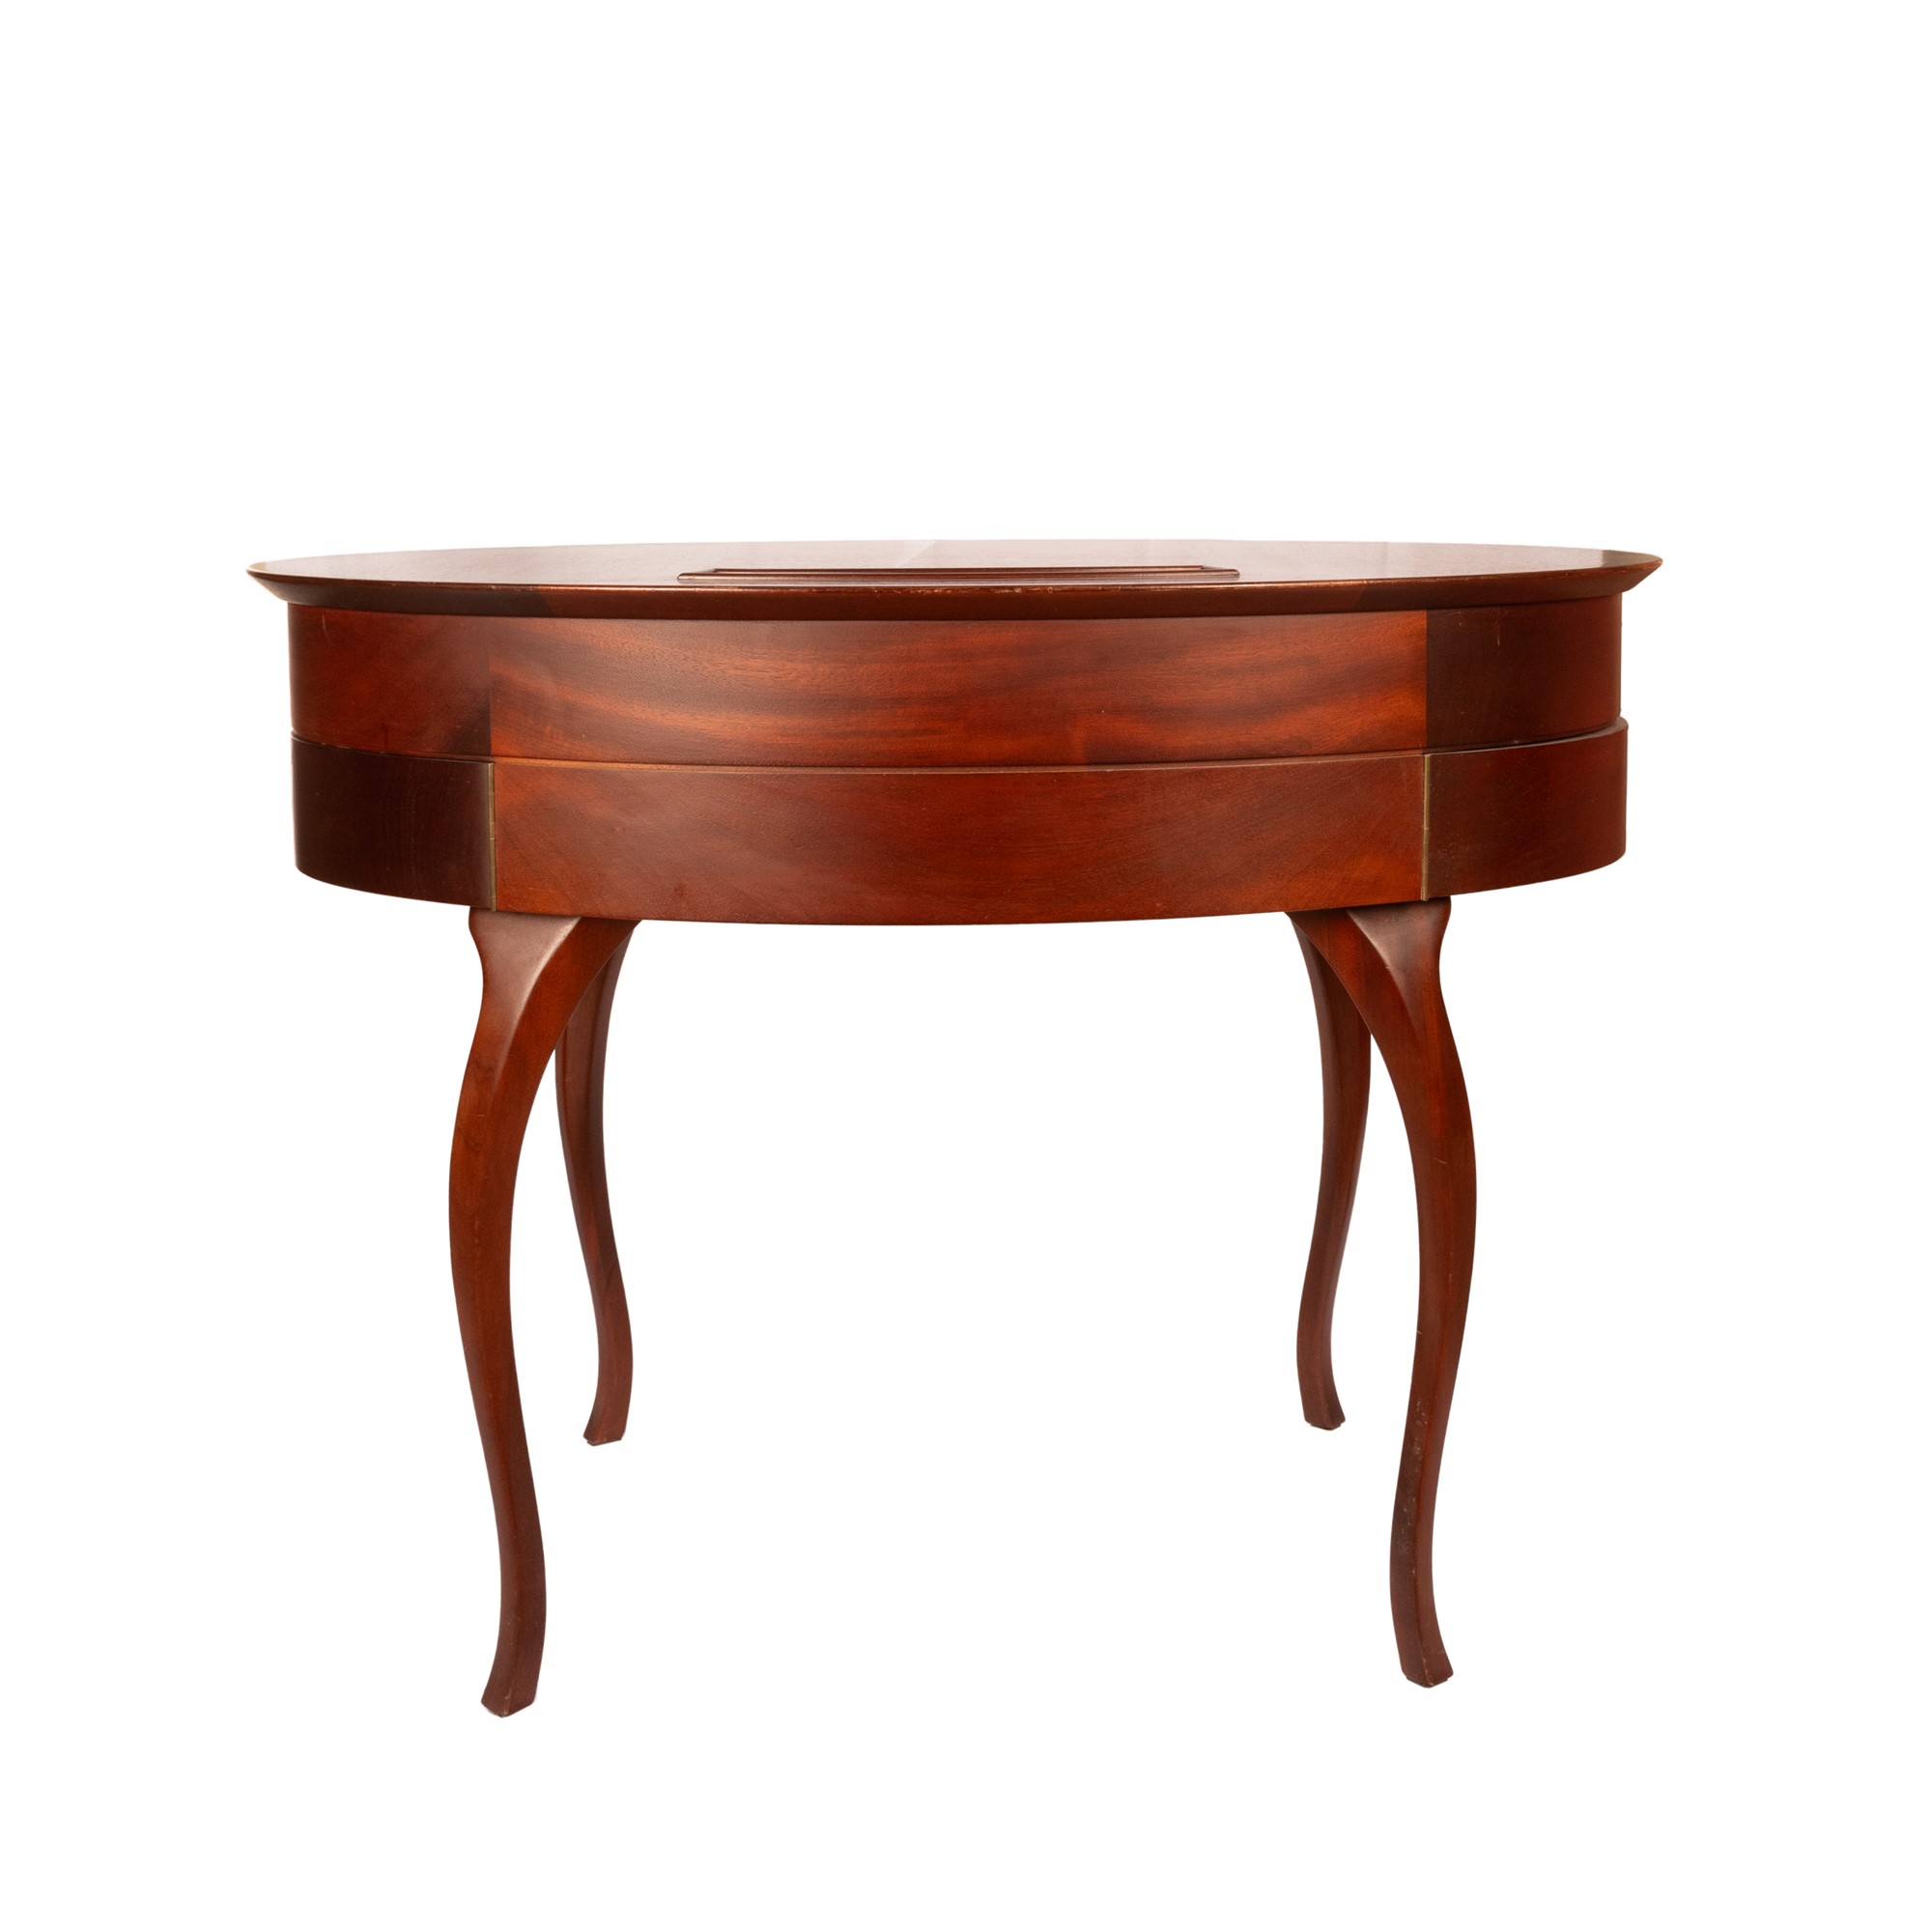 Writing desk in cherry wood - Image 23 of 25